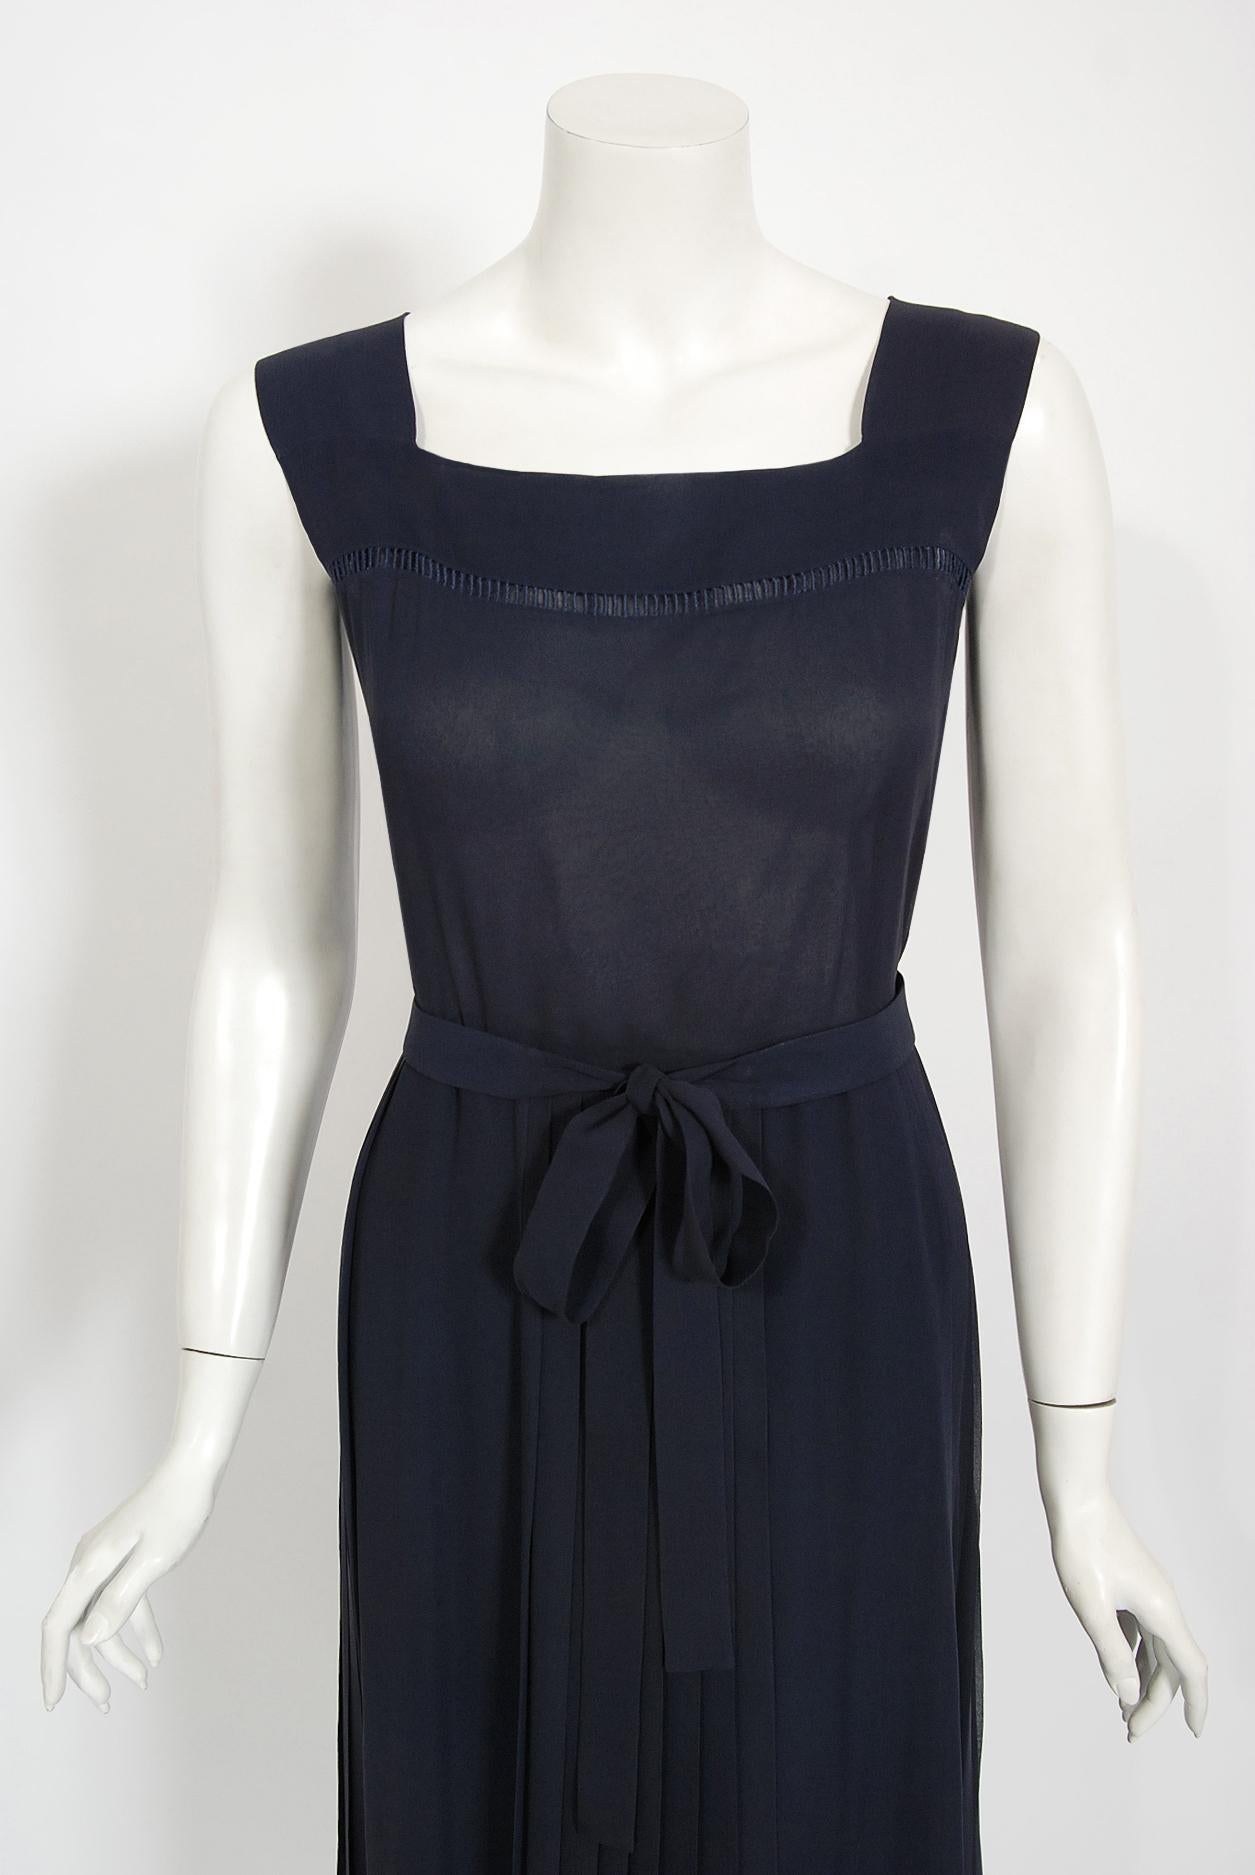 Vintage 1974 Christian Dior Haute Couture Documented Navy Pleated Silk Dress Set 2